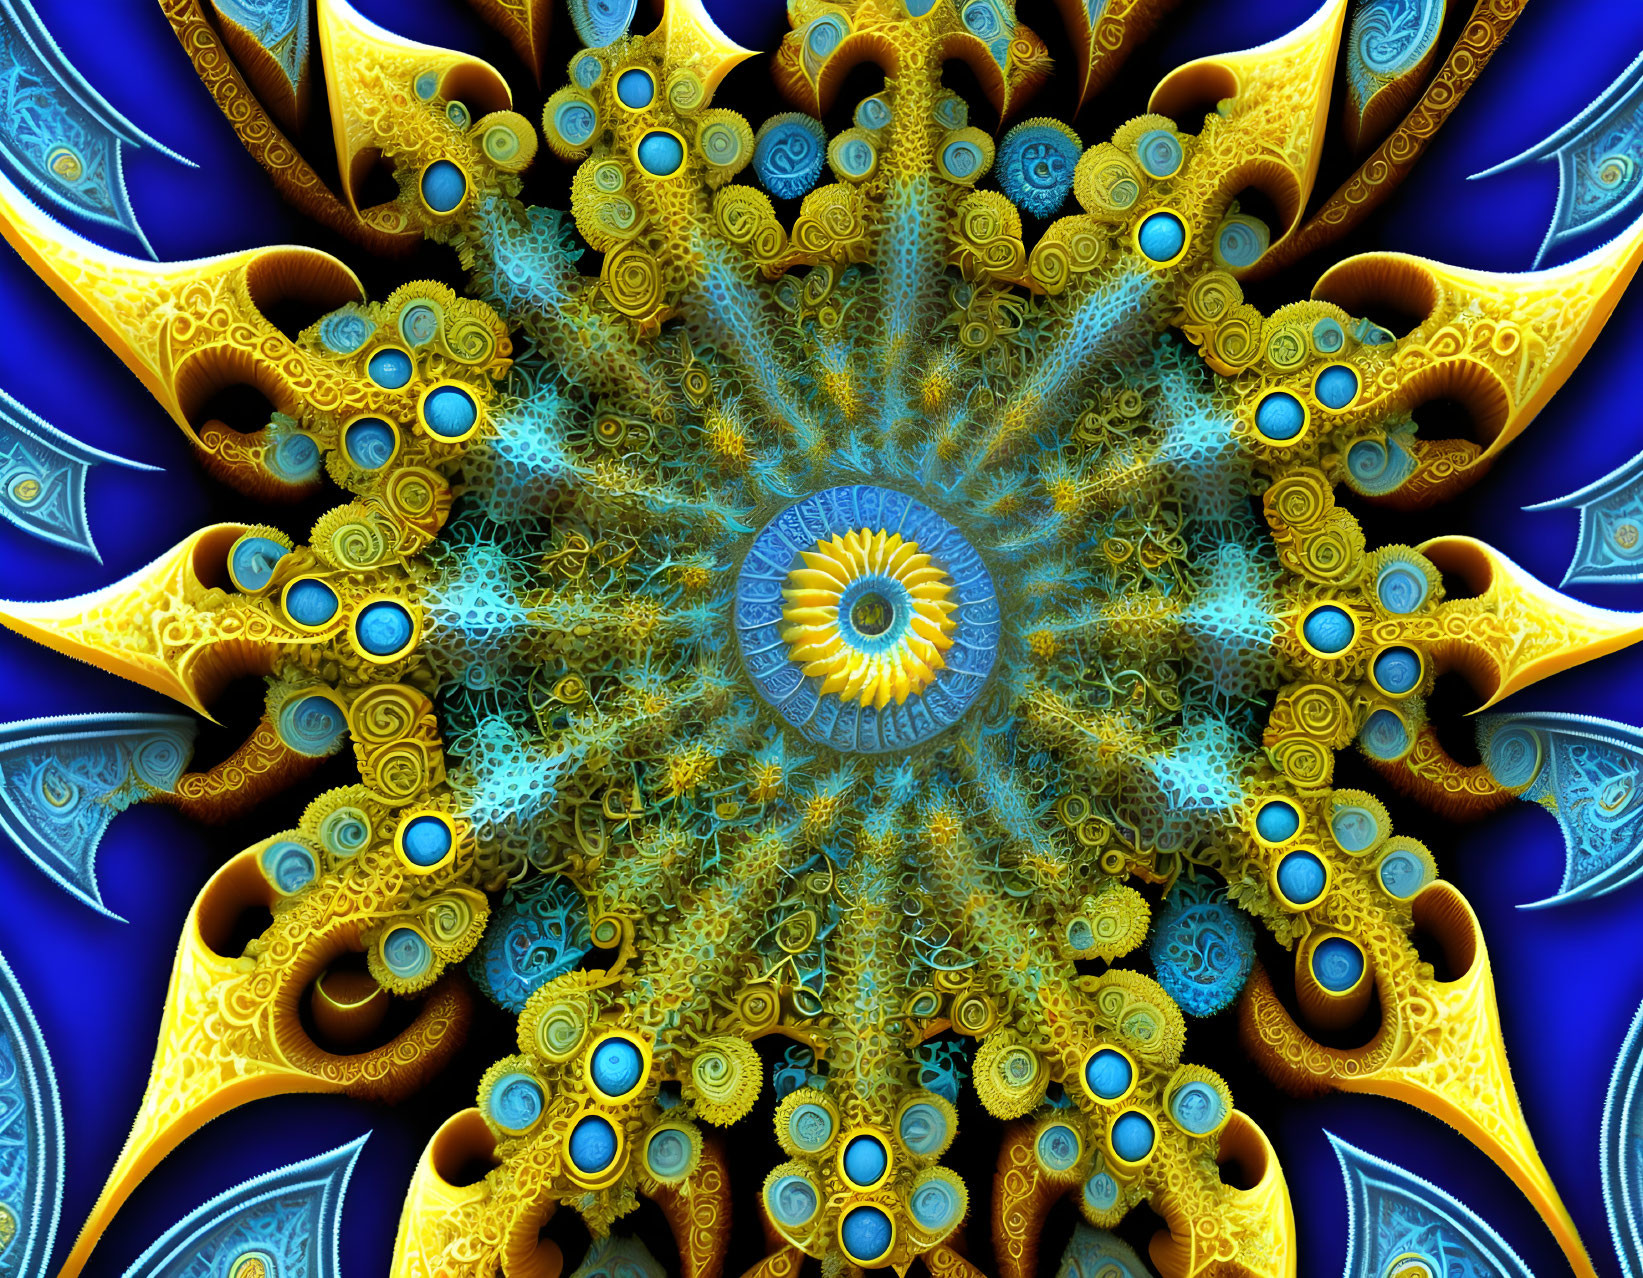 Colorful Fractal Image with Yellow Patterns on Blue Background